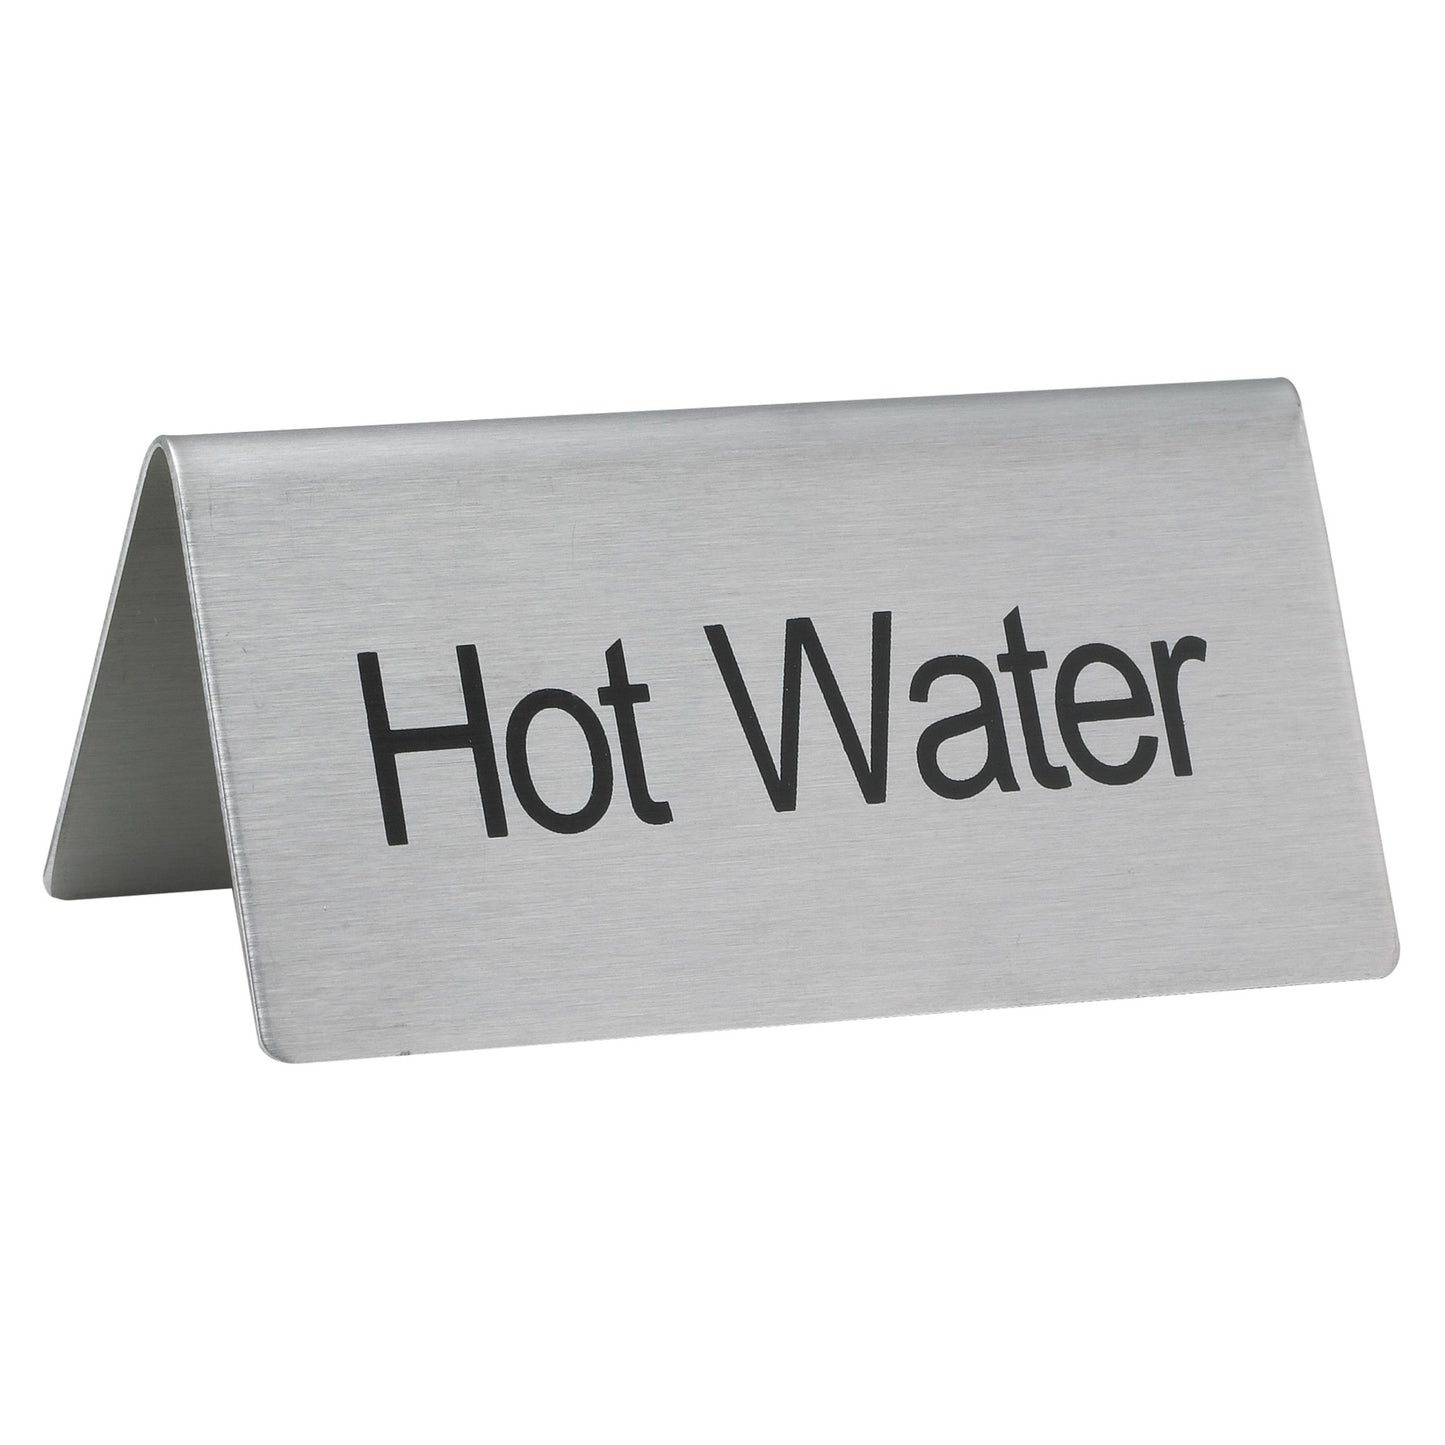 SGN-104 - Tent Sign, Stainless Steel - Hot Water